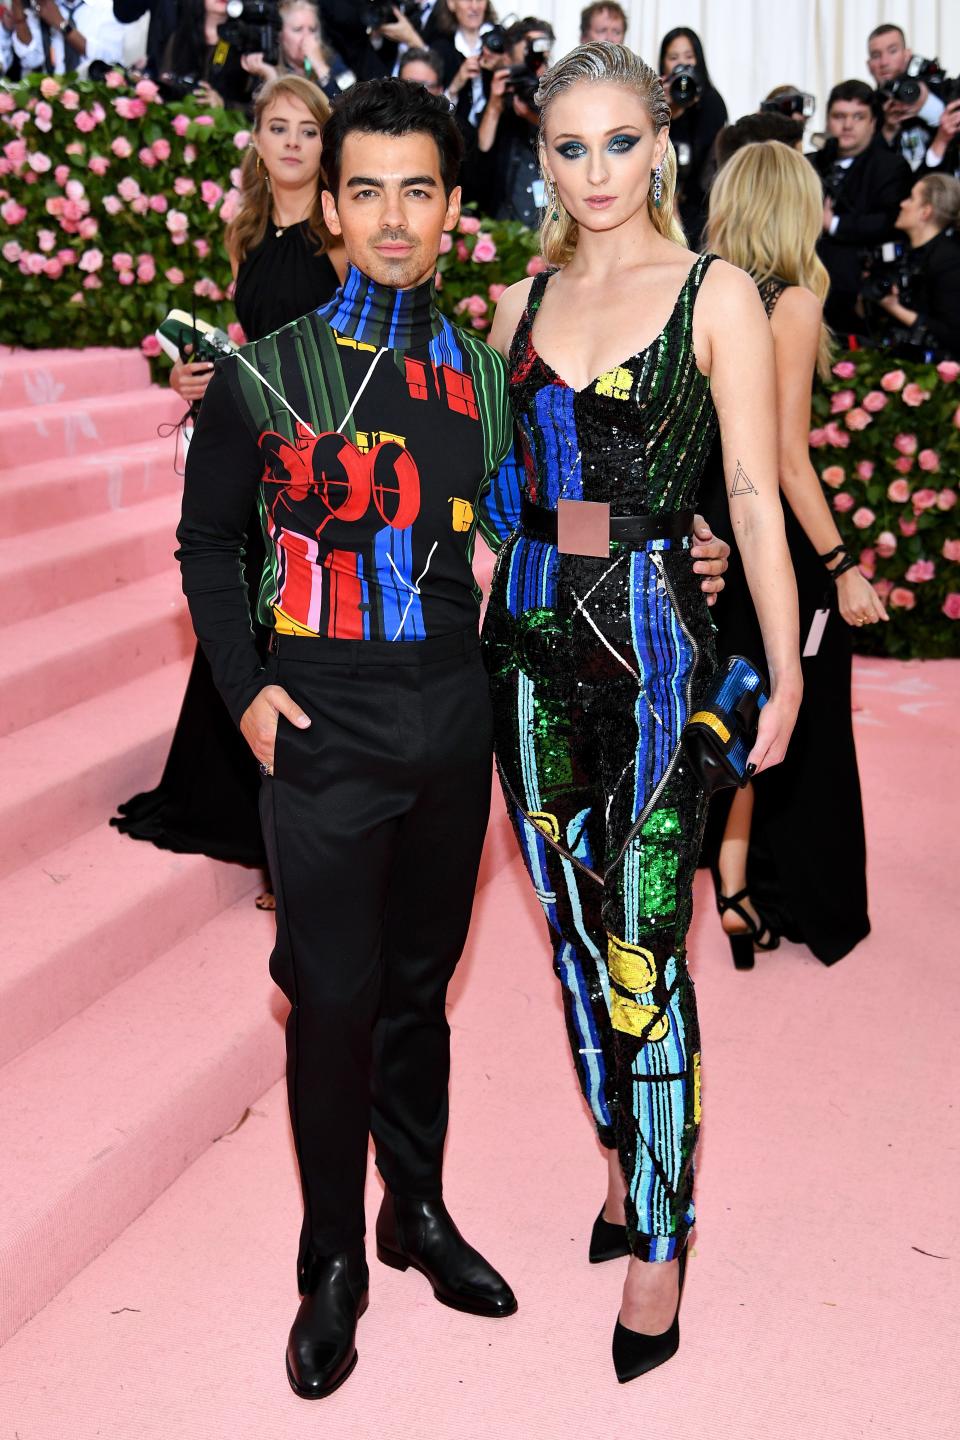 She stars on one of our favorite shows (Game of Thrones), she just got married to a boy bander (Joe Jonas), and now, Sophie Turner is looking like she's ready to save the day at the 2019 Met Gala. The actress and newlywed popped up on the pink carpet in a custom Louis Vuitton look, which, according to her stylist Kate Young, was meant to give off "a superhero vibe."